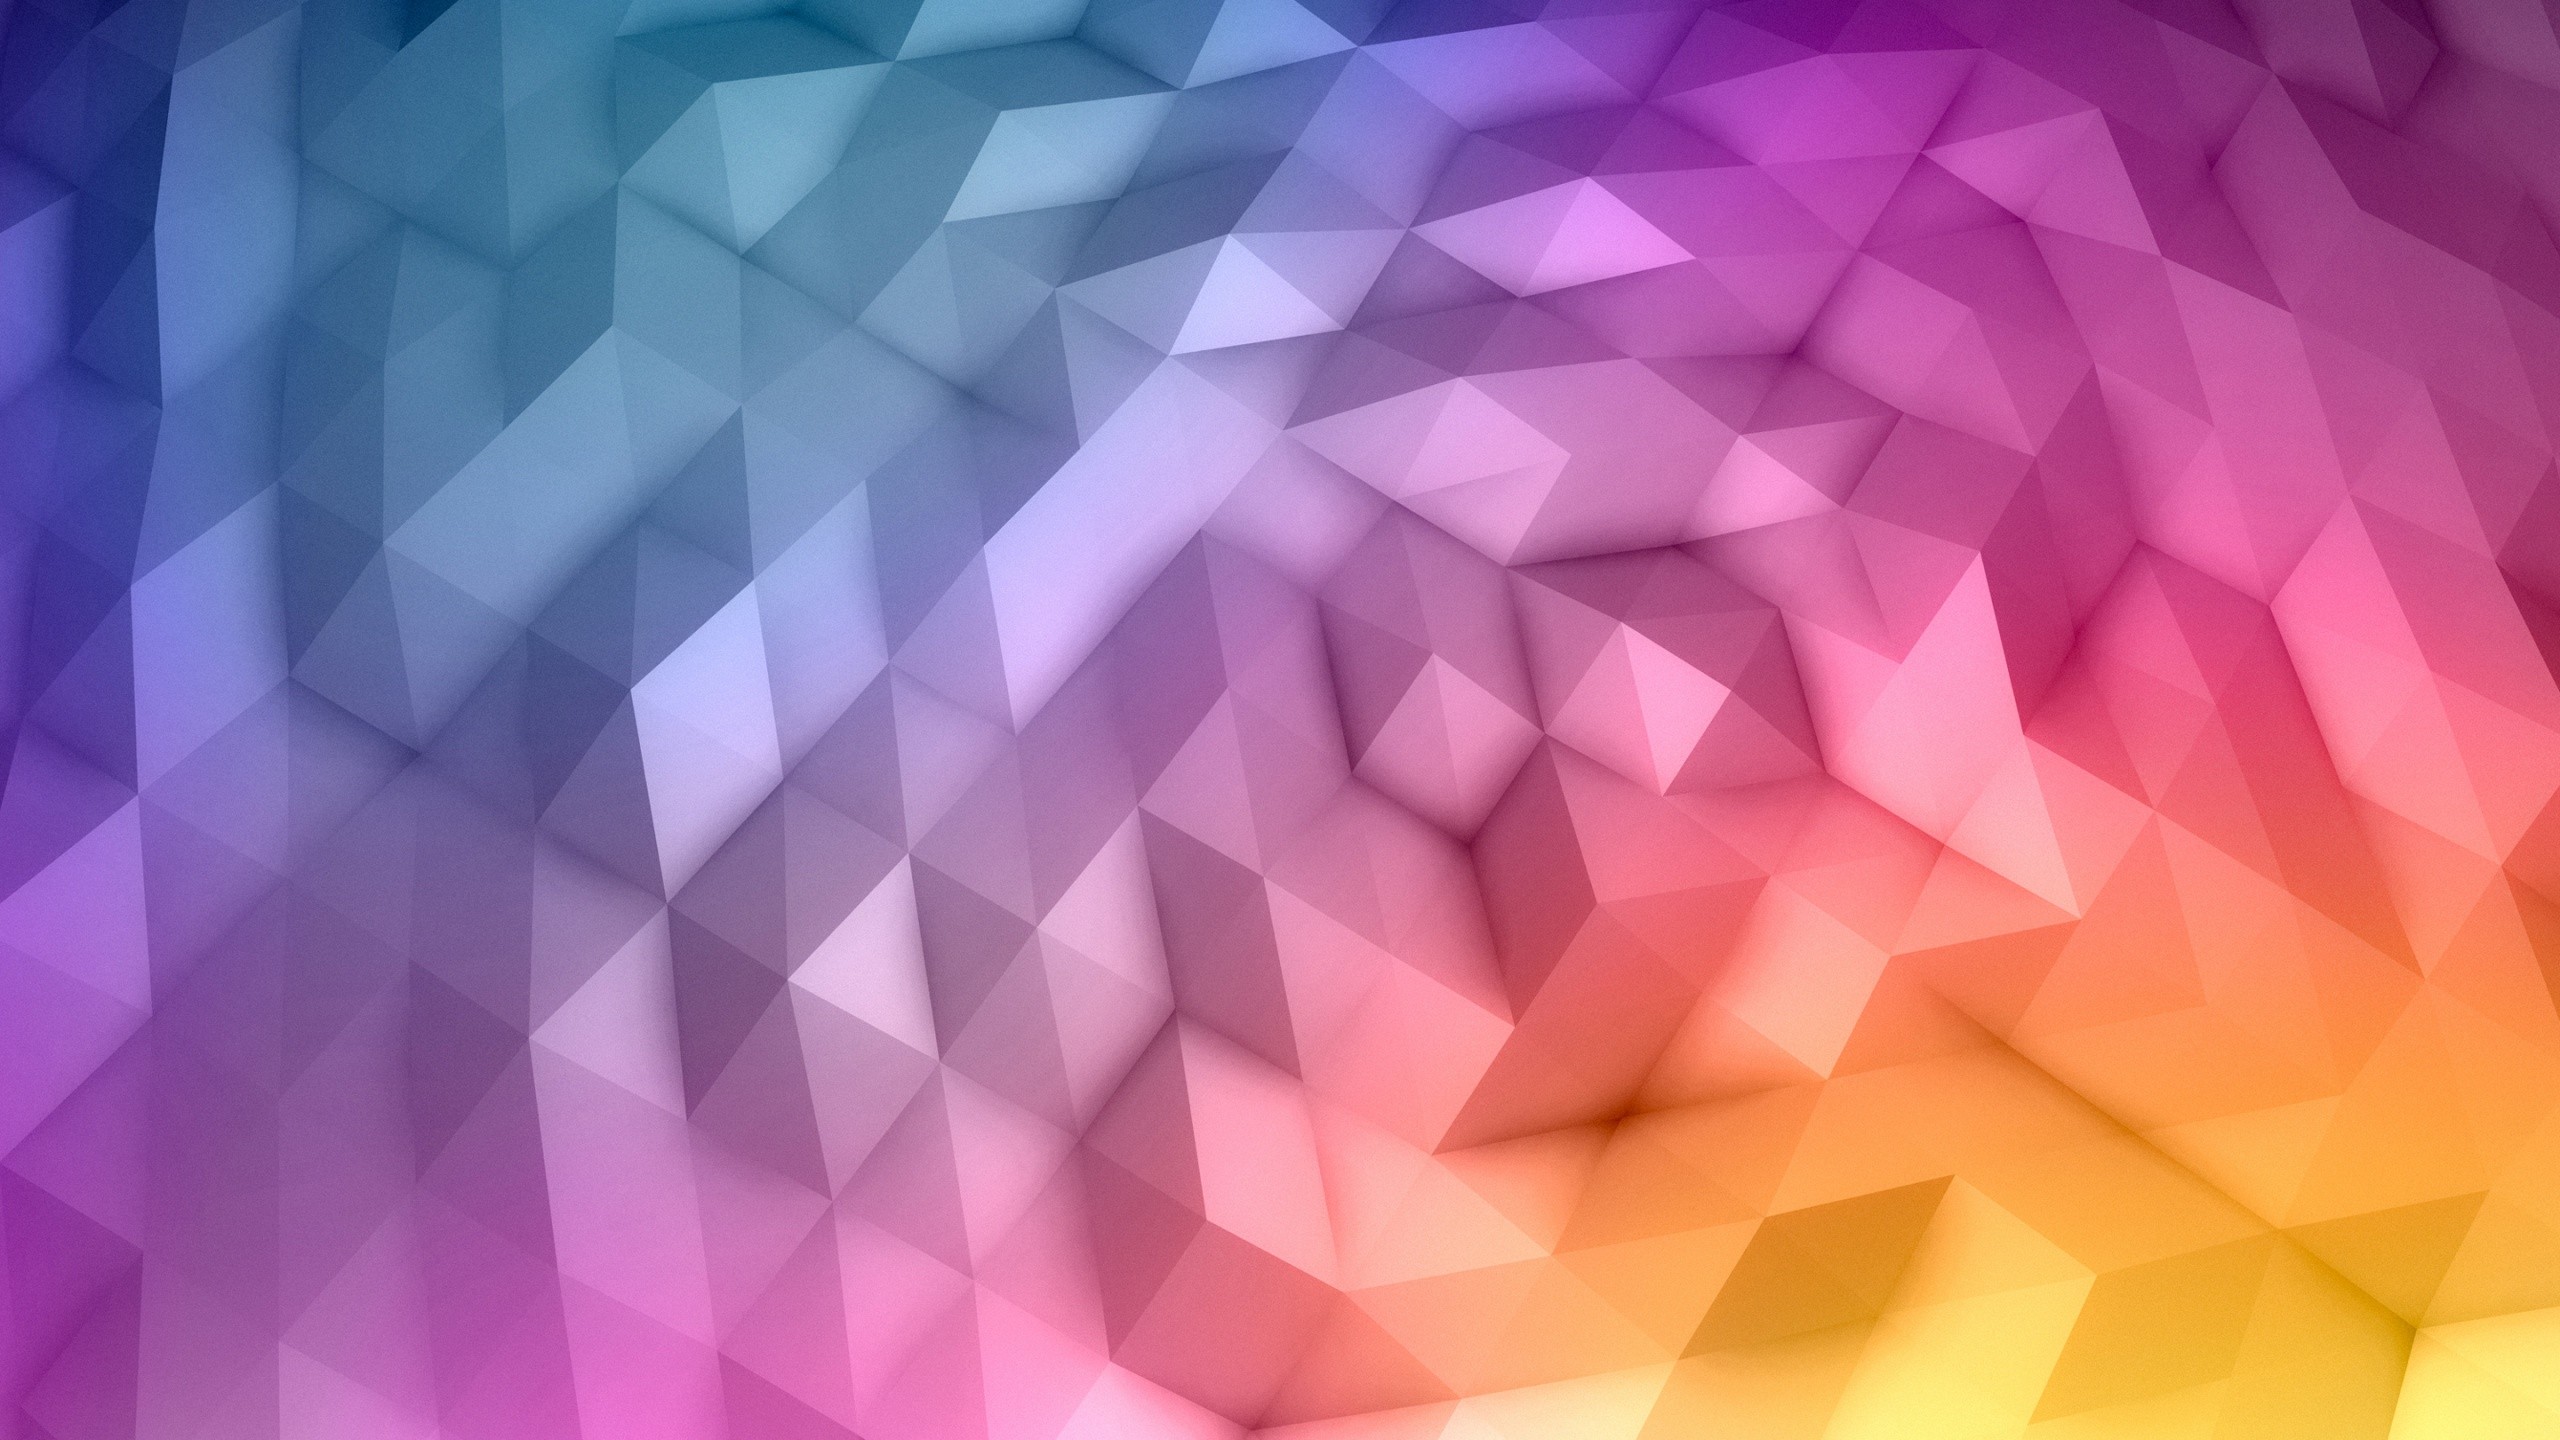 General 2560x1440 abstract low poly digital art colorful texture gradient